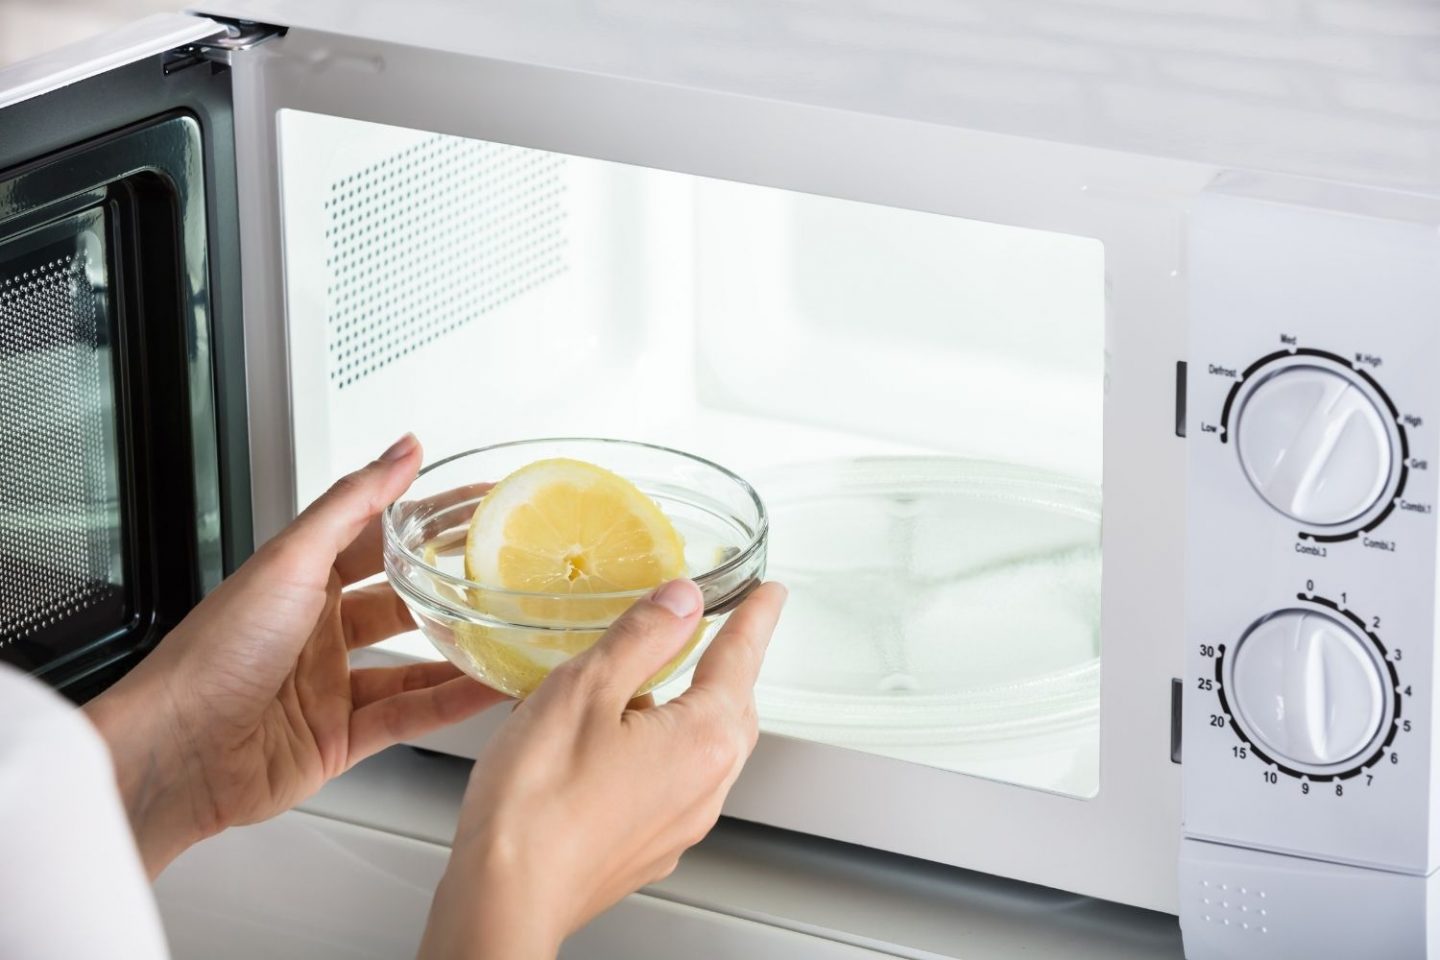 A close-up photo showing a white microwave with the door open. A woman is placing inside a clear bowl with water and half a lemon. This is the cleaning hack for getting rid of odours and cleaning a microwave.